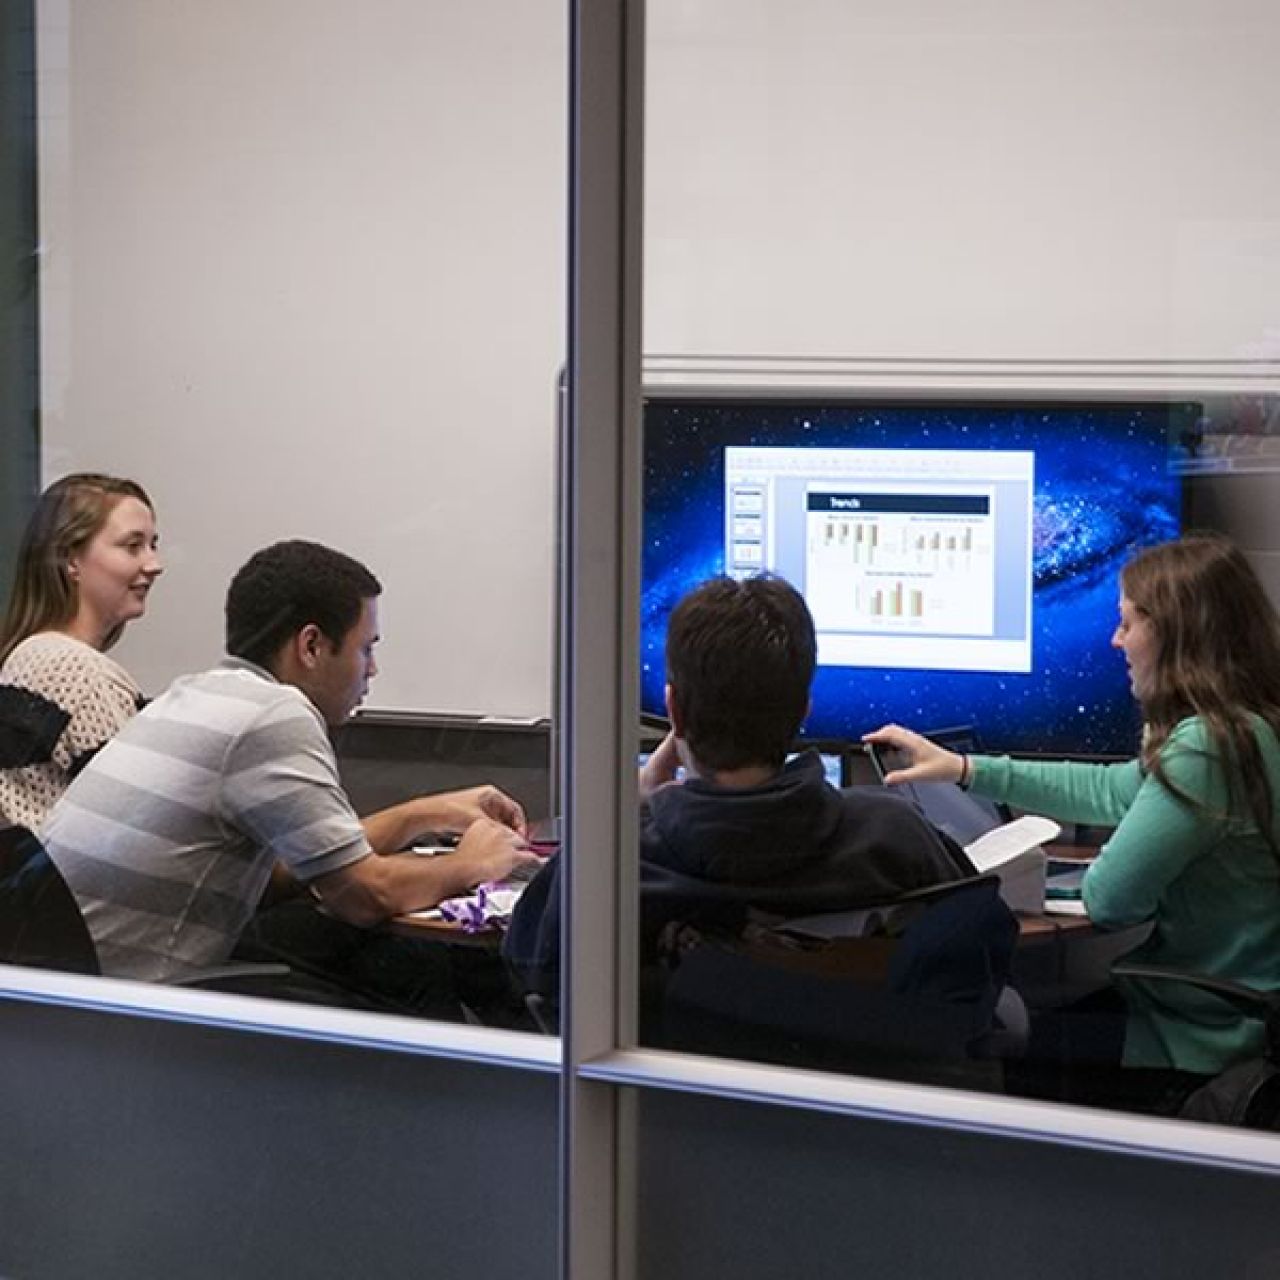 A group of four students sitting in front of a large monitor working on a group project